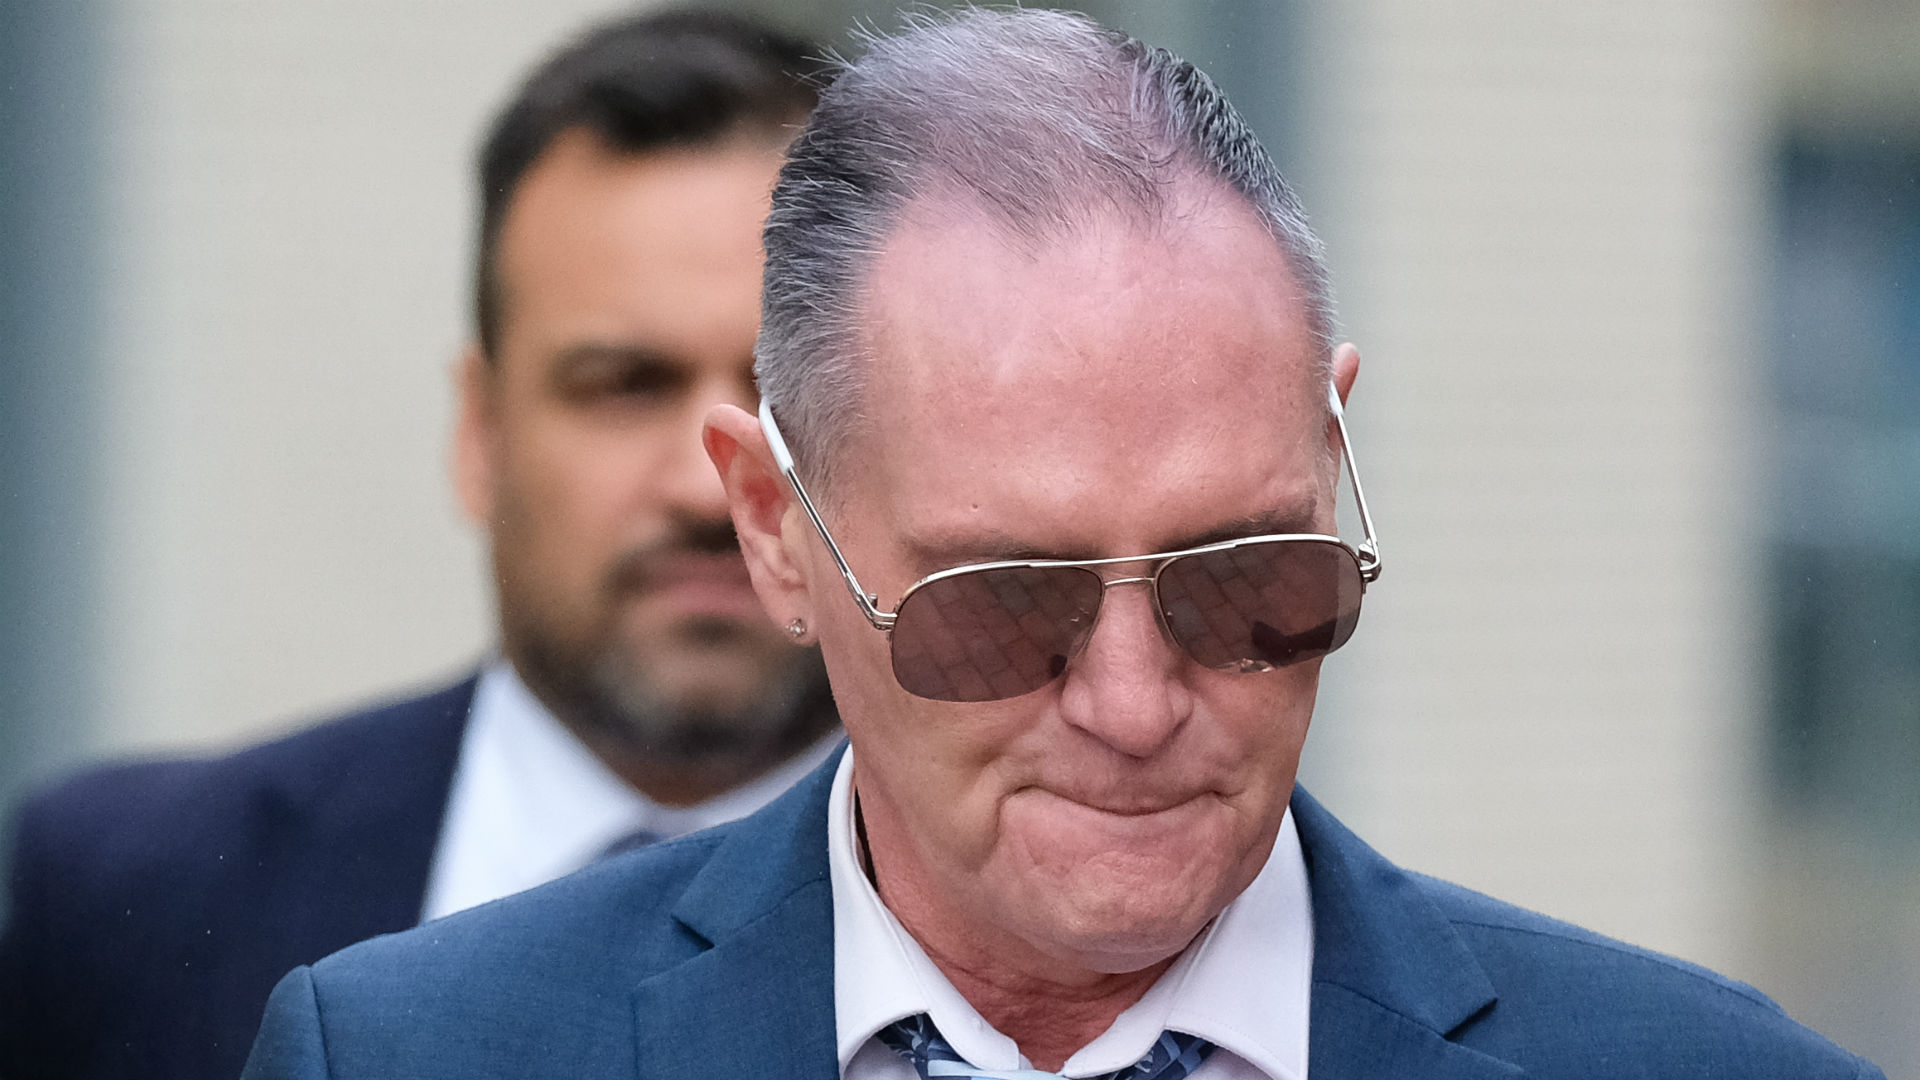 Paul Gascoigne has been cleared of sexual assault and common assault following an incident on a train in August 2018.